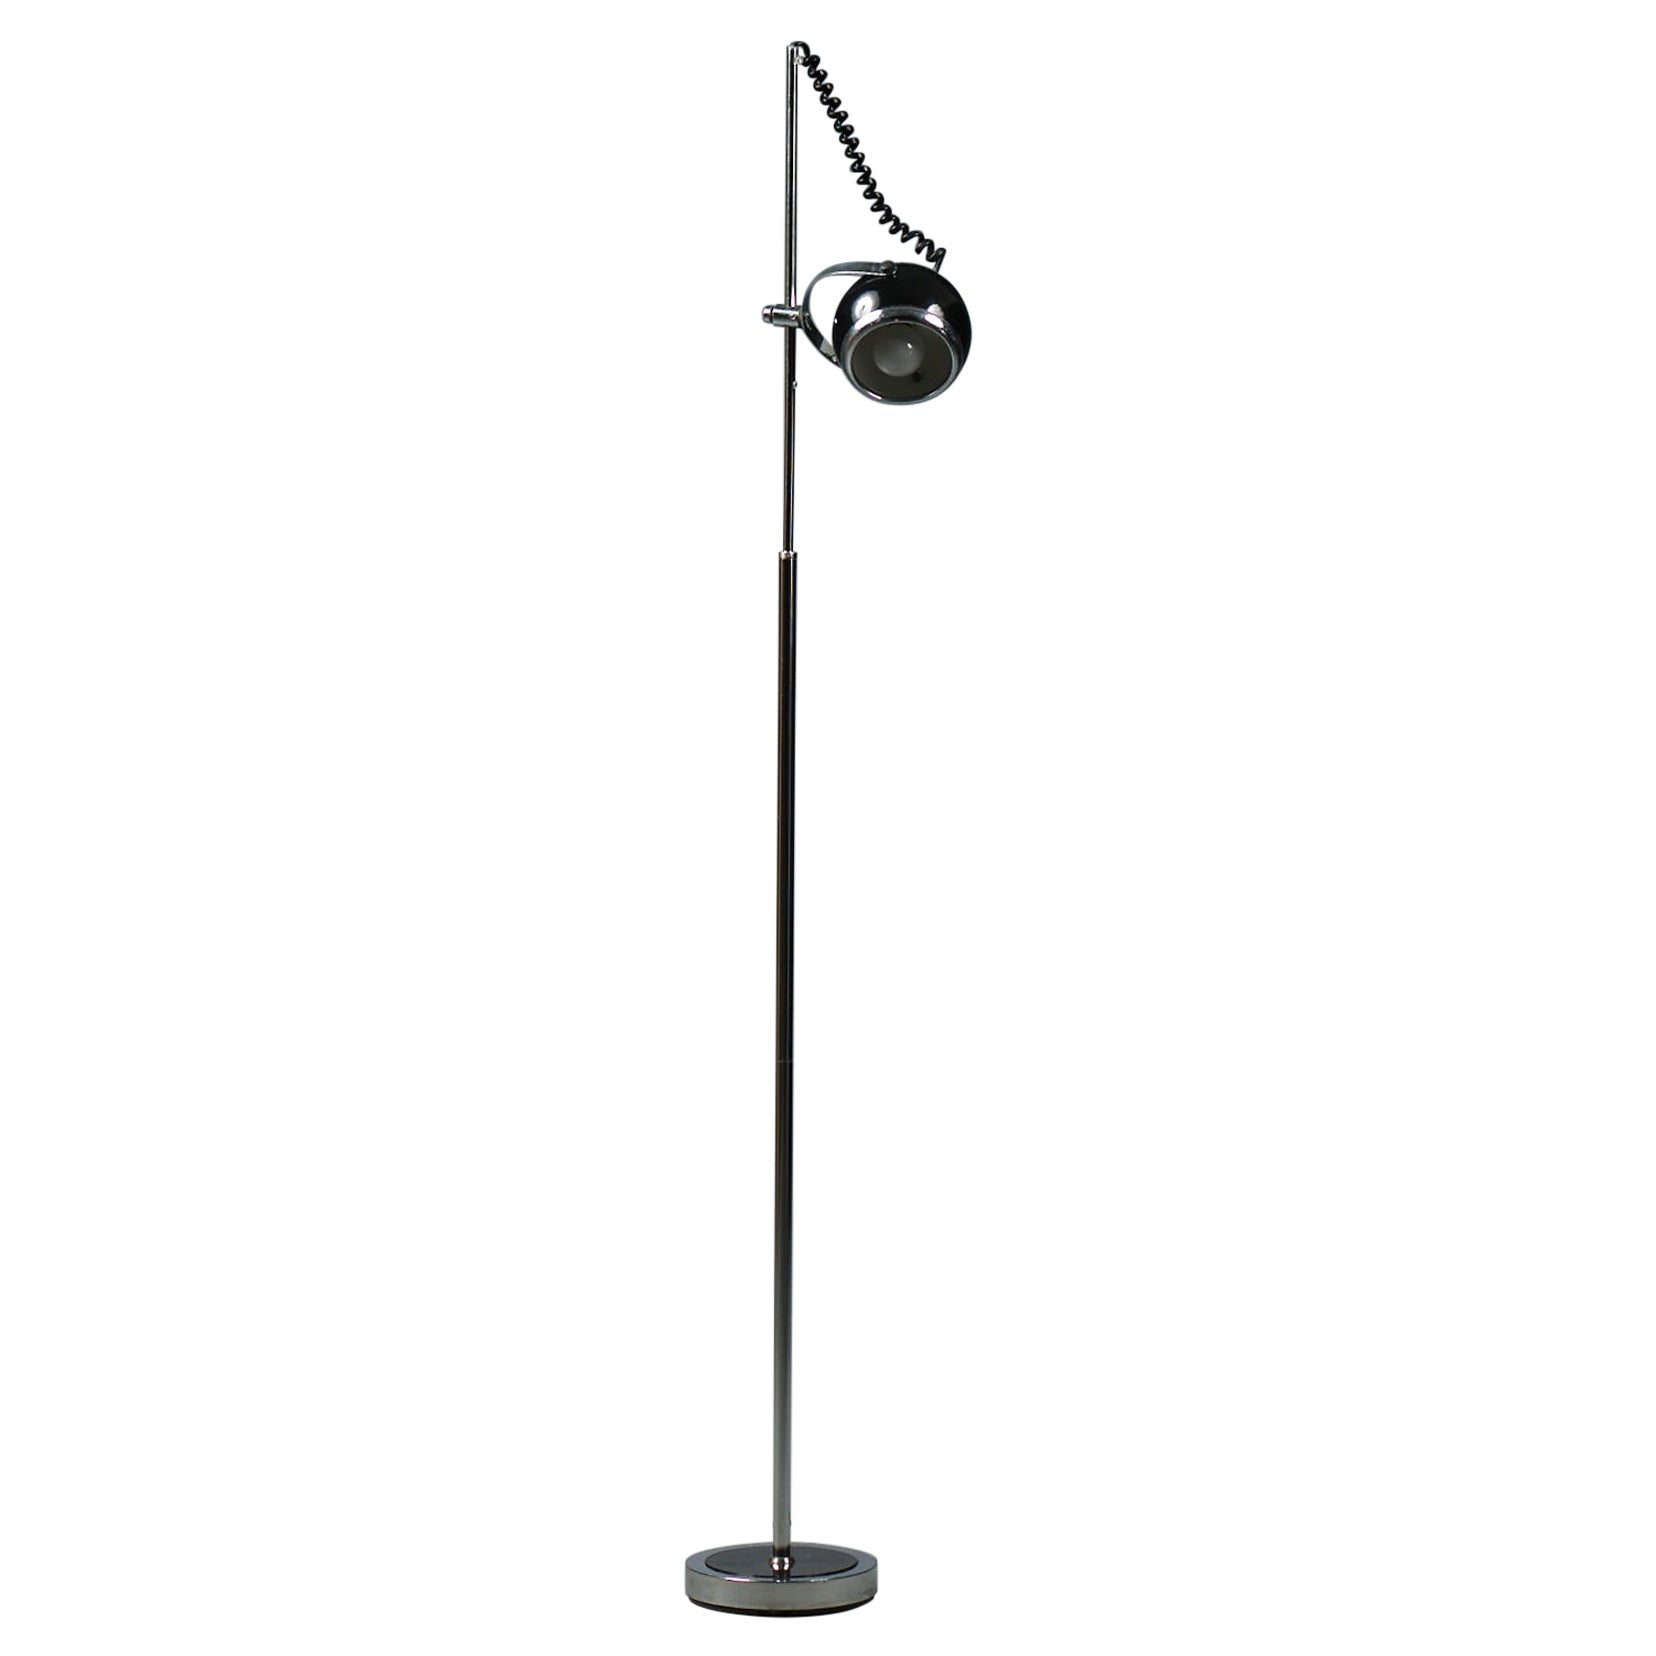 1970s Italian Floor Lamp: Chrome Steel with Adjustable Spherical Diffuser For Sale